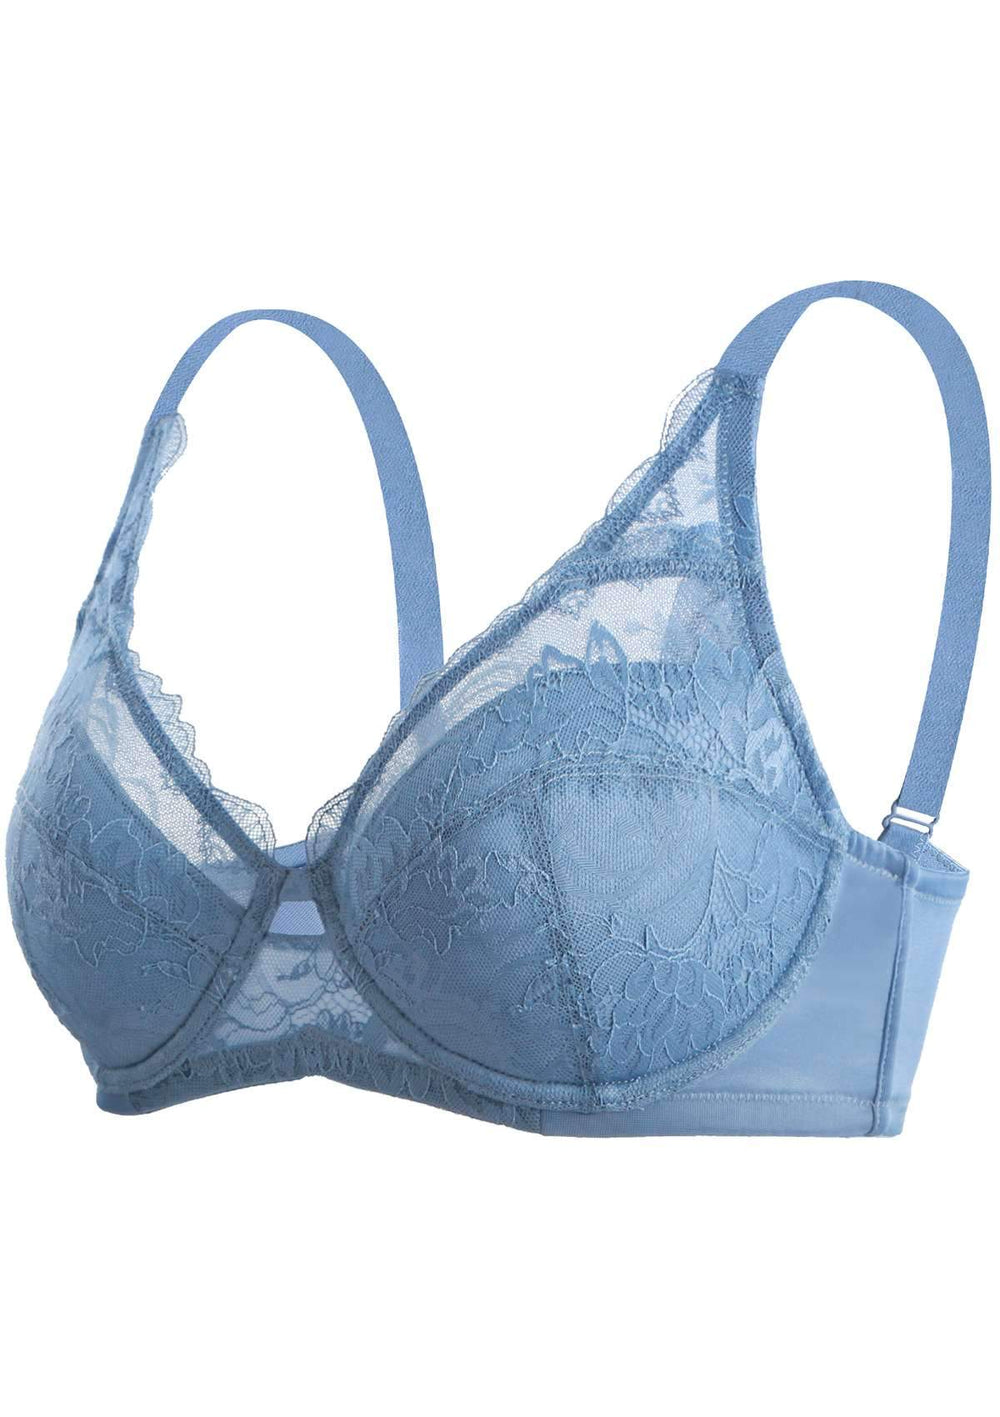 <strong>Discover the Comfort and Style of Hsia Life’s Minimizer and Lace Bras</strong>